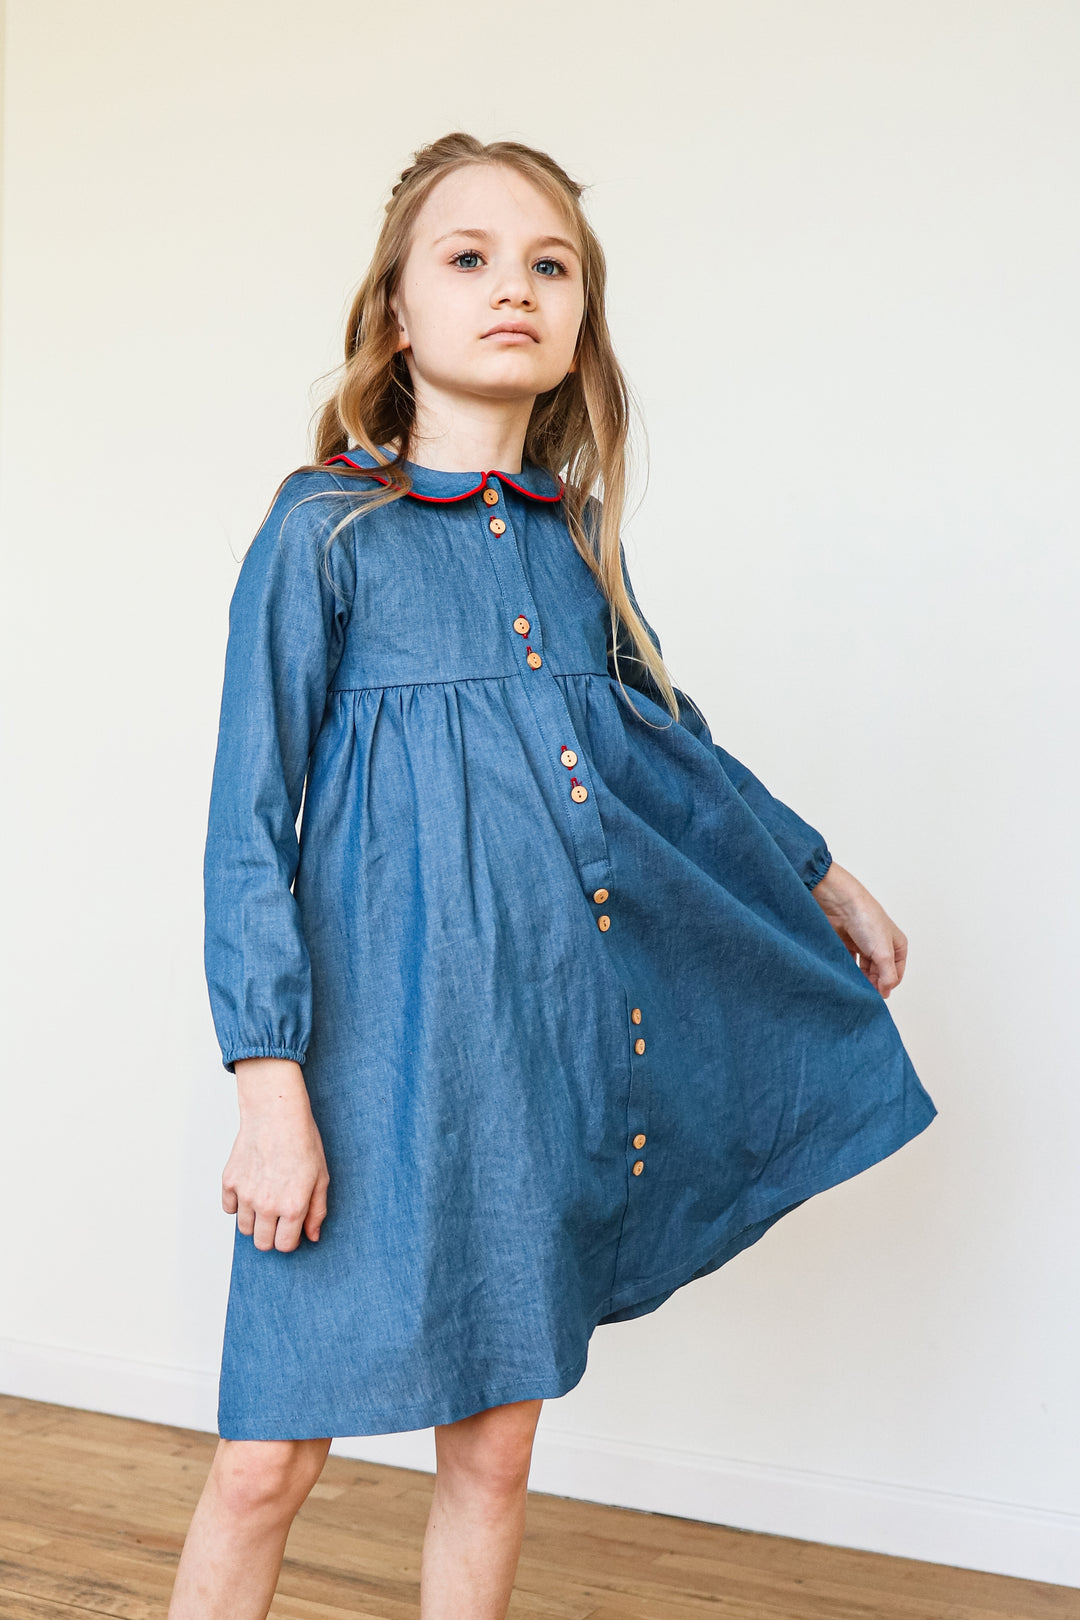 Contrast Color Piping Denim Dress